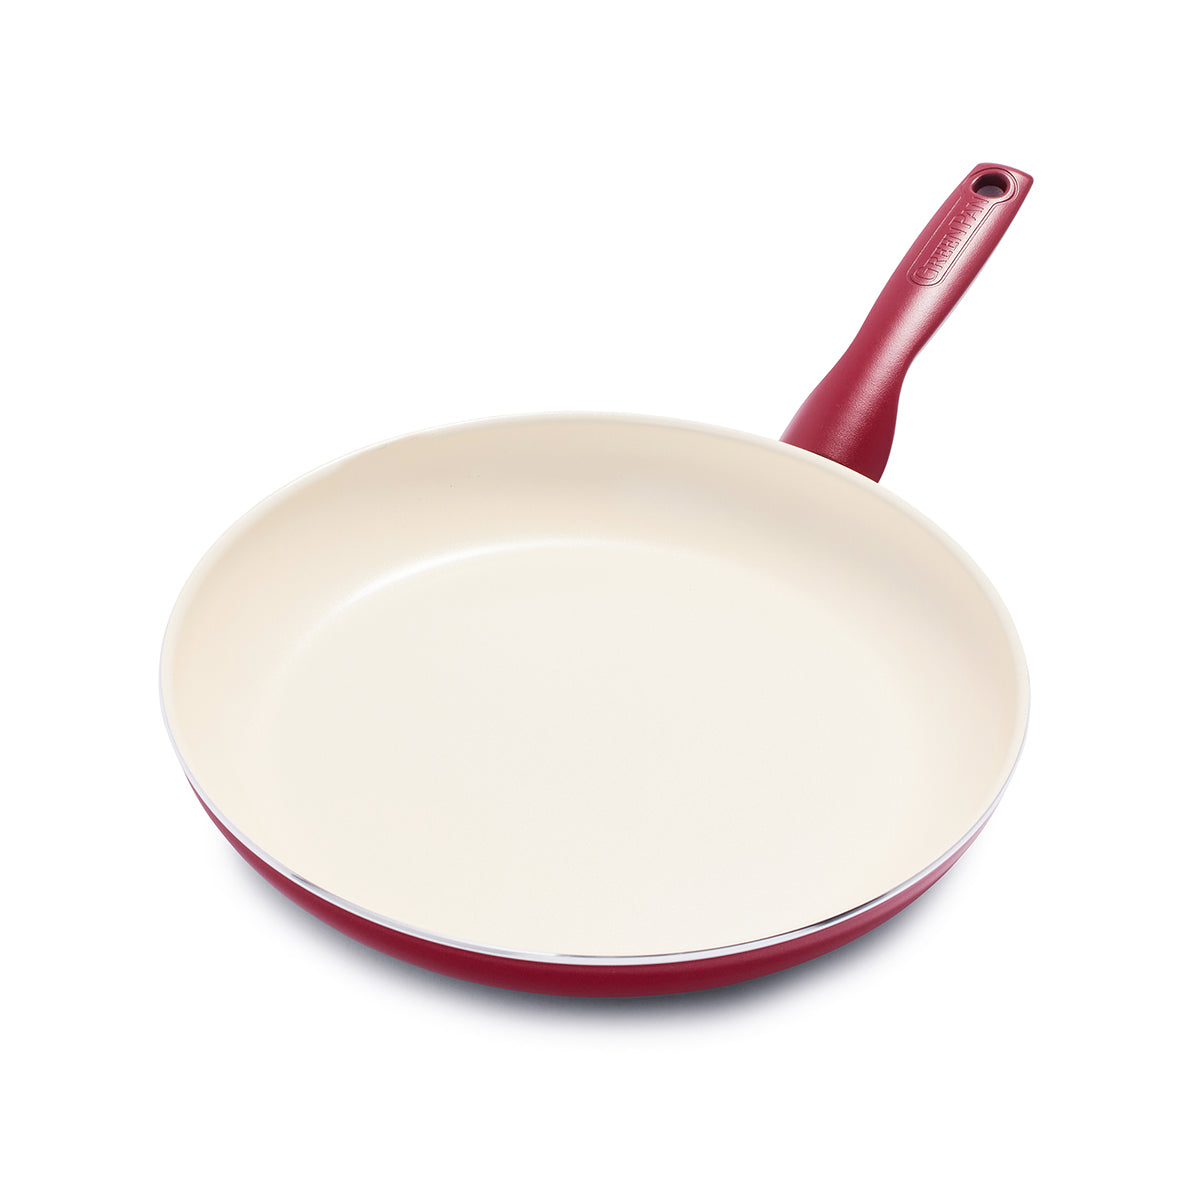 F 12" Large Fry Pan - Large Skillet Nonstick Frying Pan with